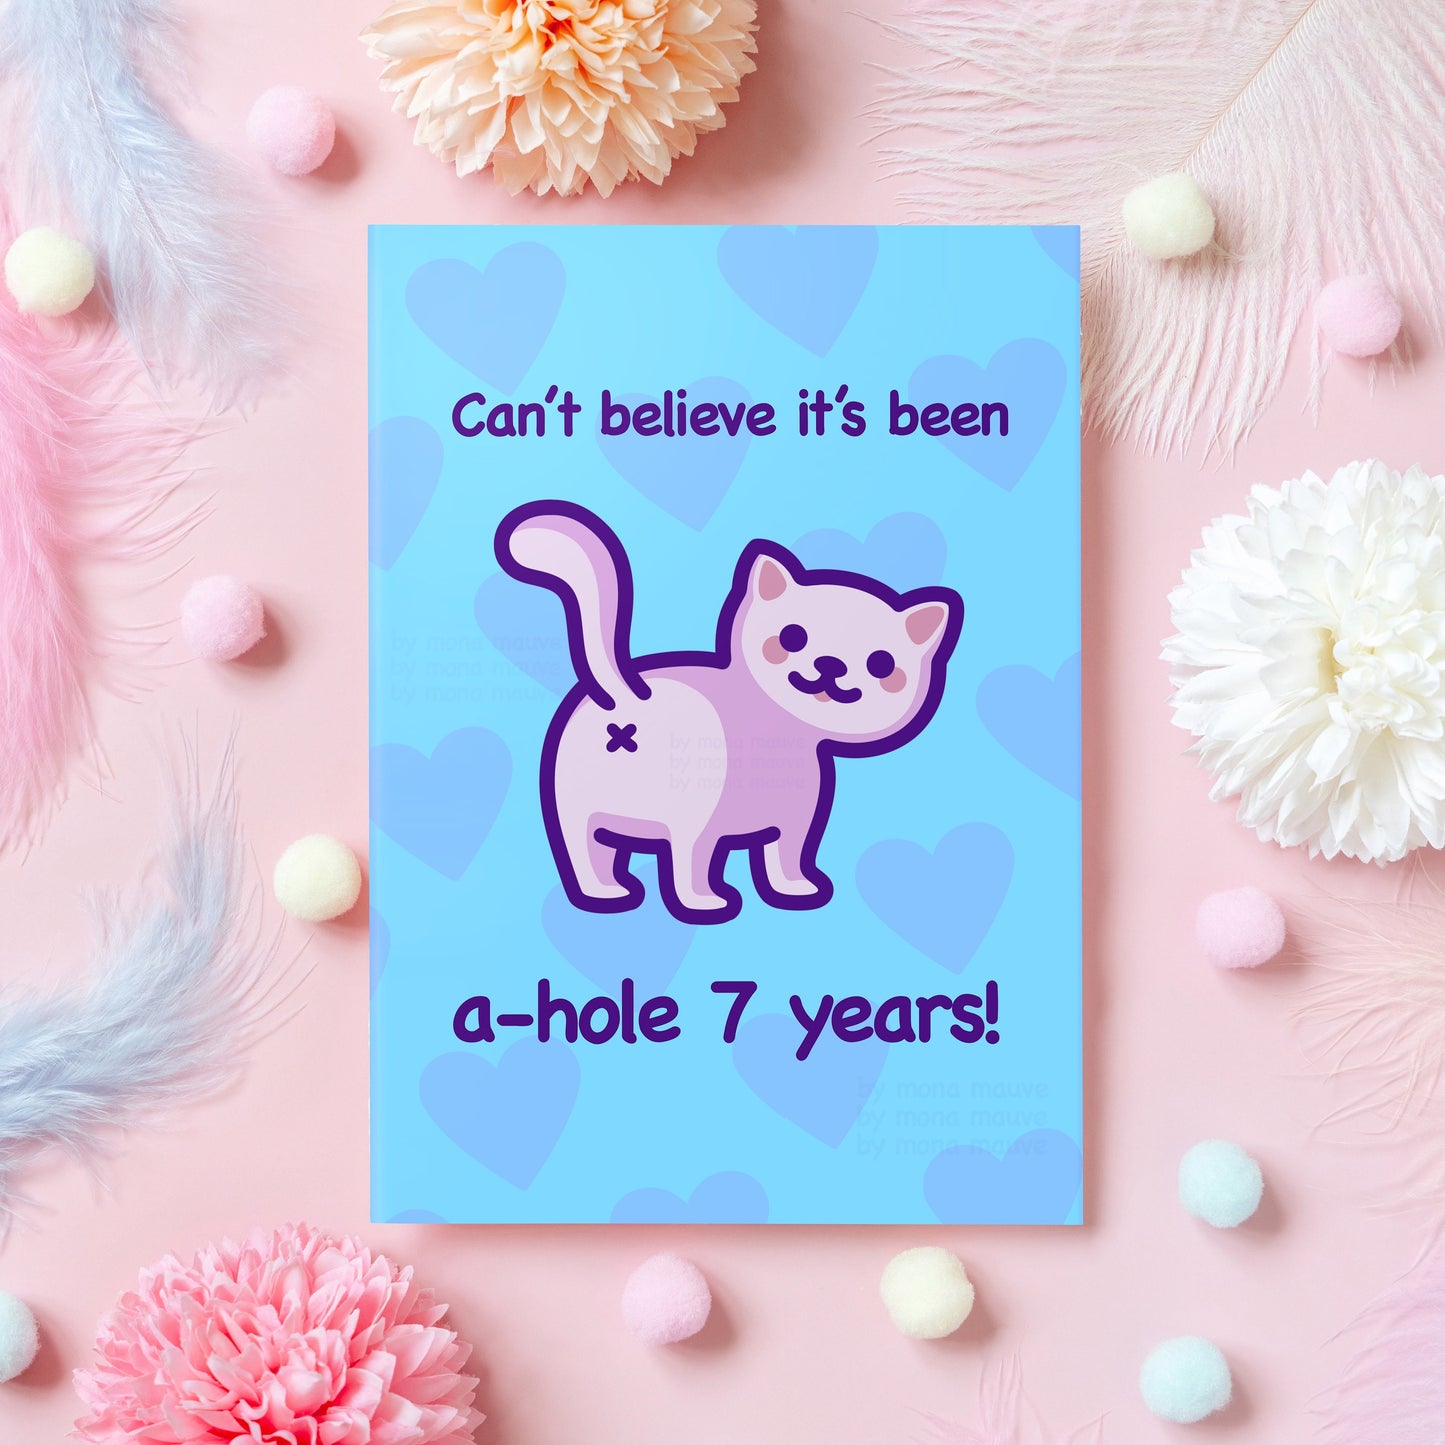 Funny 7 Year Anniversary Card | Cat Butt Meme Card | 7th Anniversary Gift for Husband, Wife, Boyfriend, Girlfriend - Her or Him